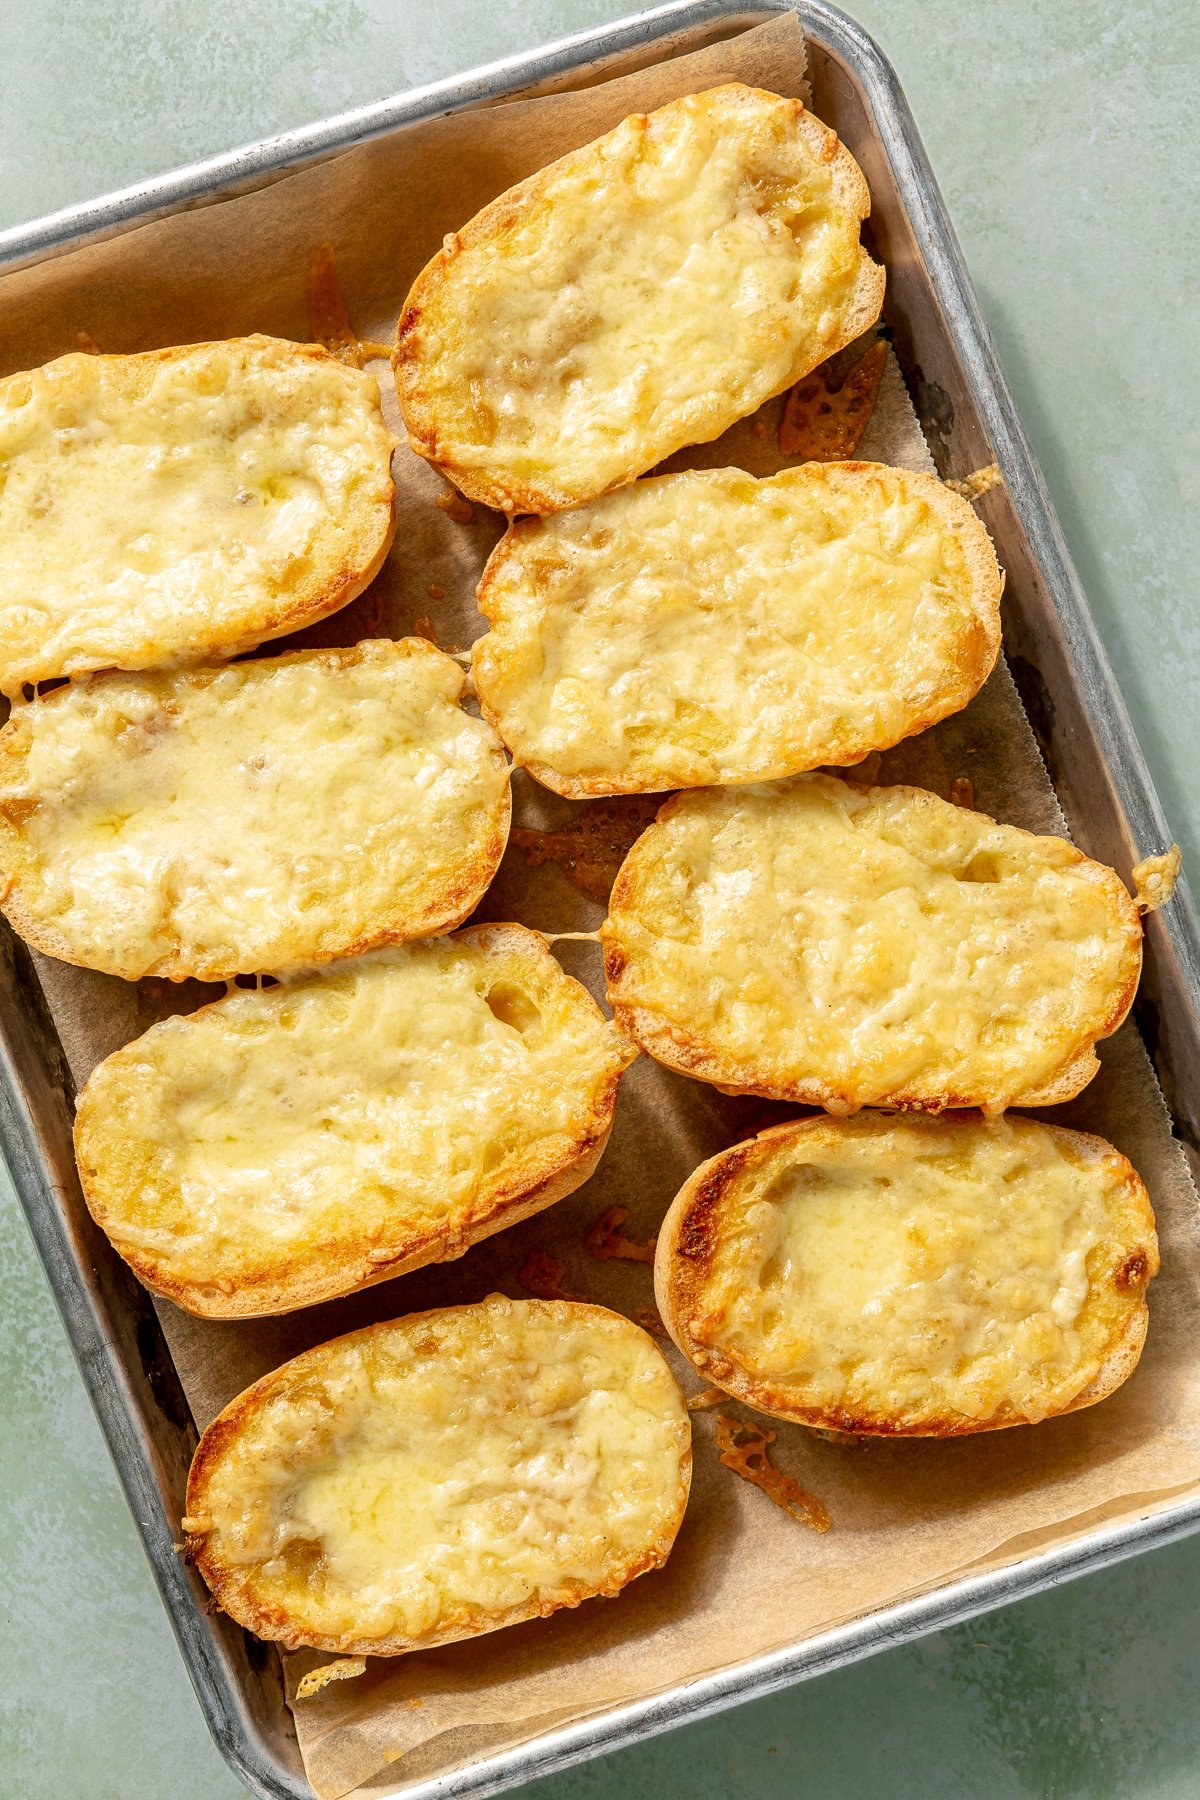 Now toasted, the cheese covered baguette halves sit on a metal baking sheet.